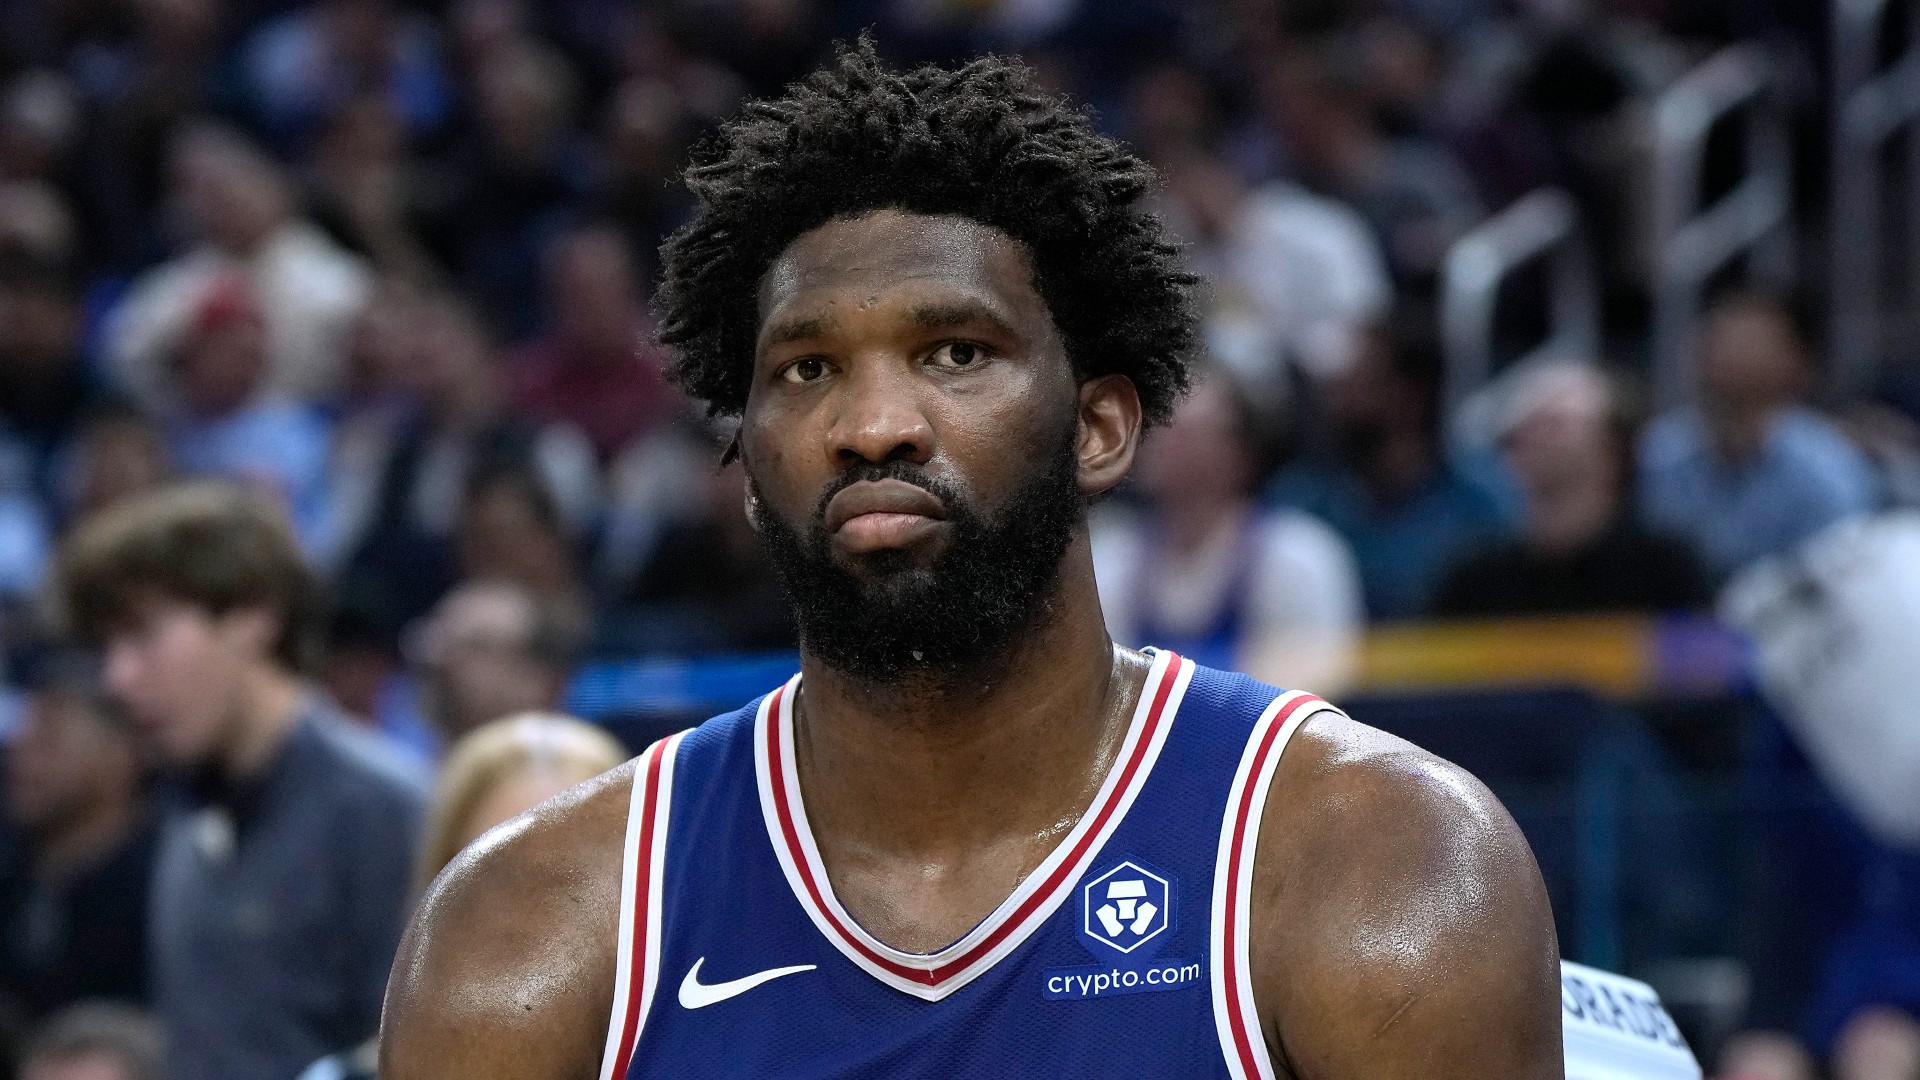 76ers star Embiid to have surgery